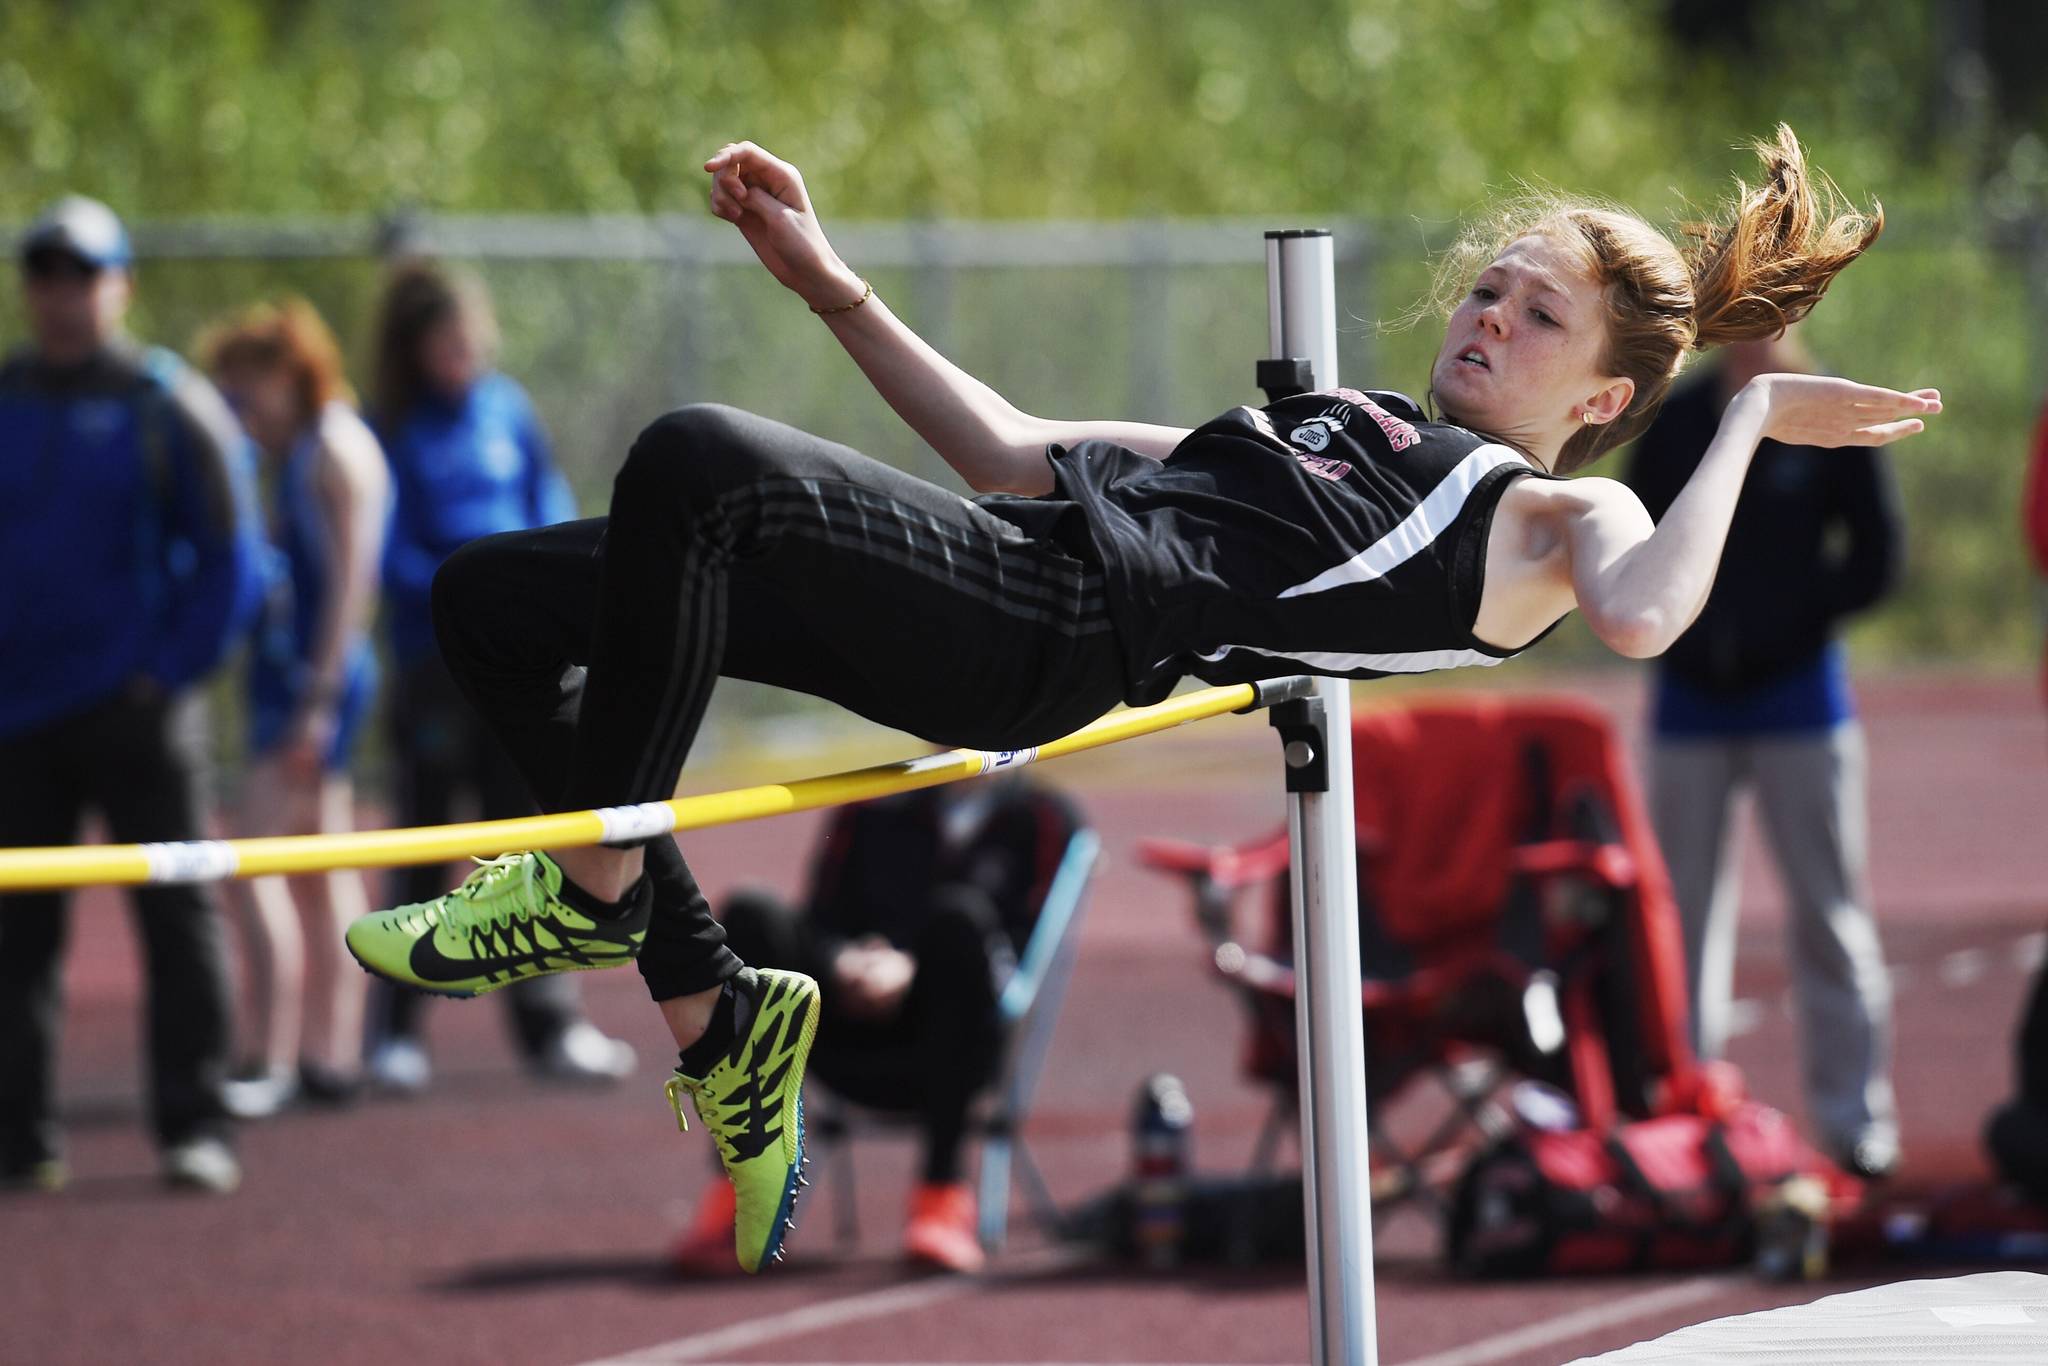 Juneau-Douglas’ Ayah Frayley competes in the high jump at the Region V Track and Field Championships at Thunder Mountain High School on Friday, May 17, 2019. (Michael Penn | Juneau Empire)